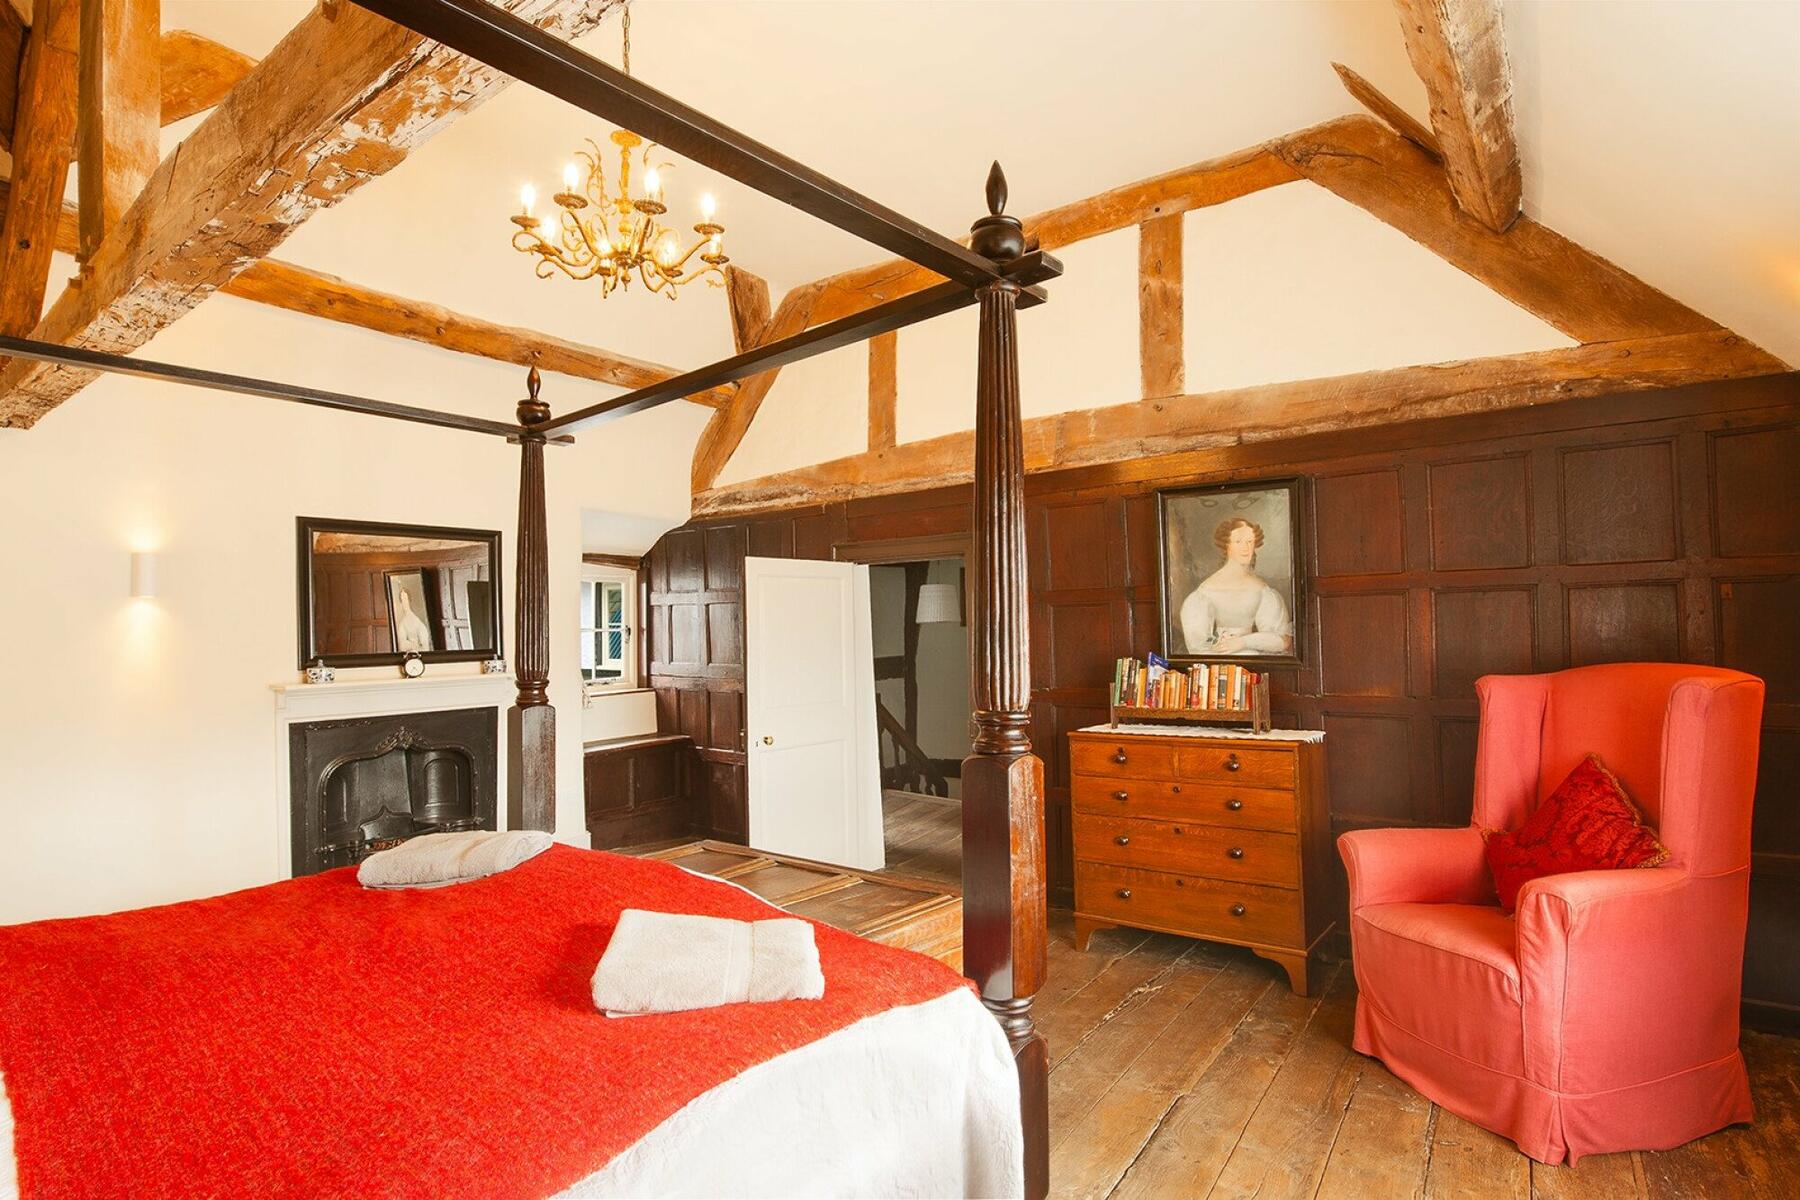 The master bedroom dates back to the 15th century